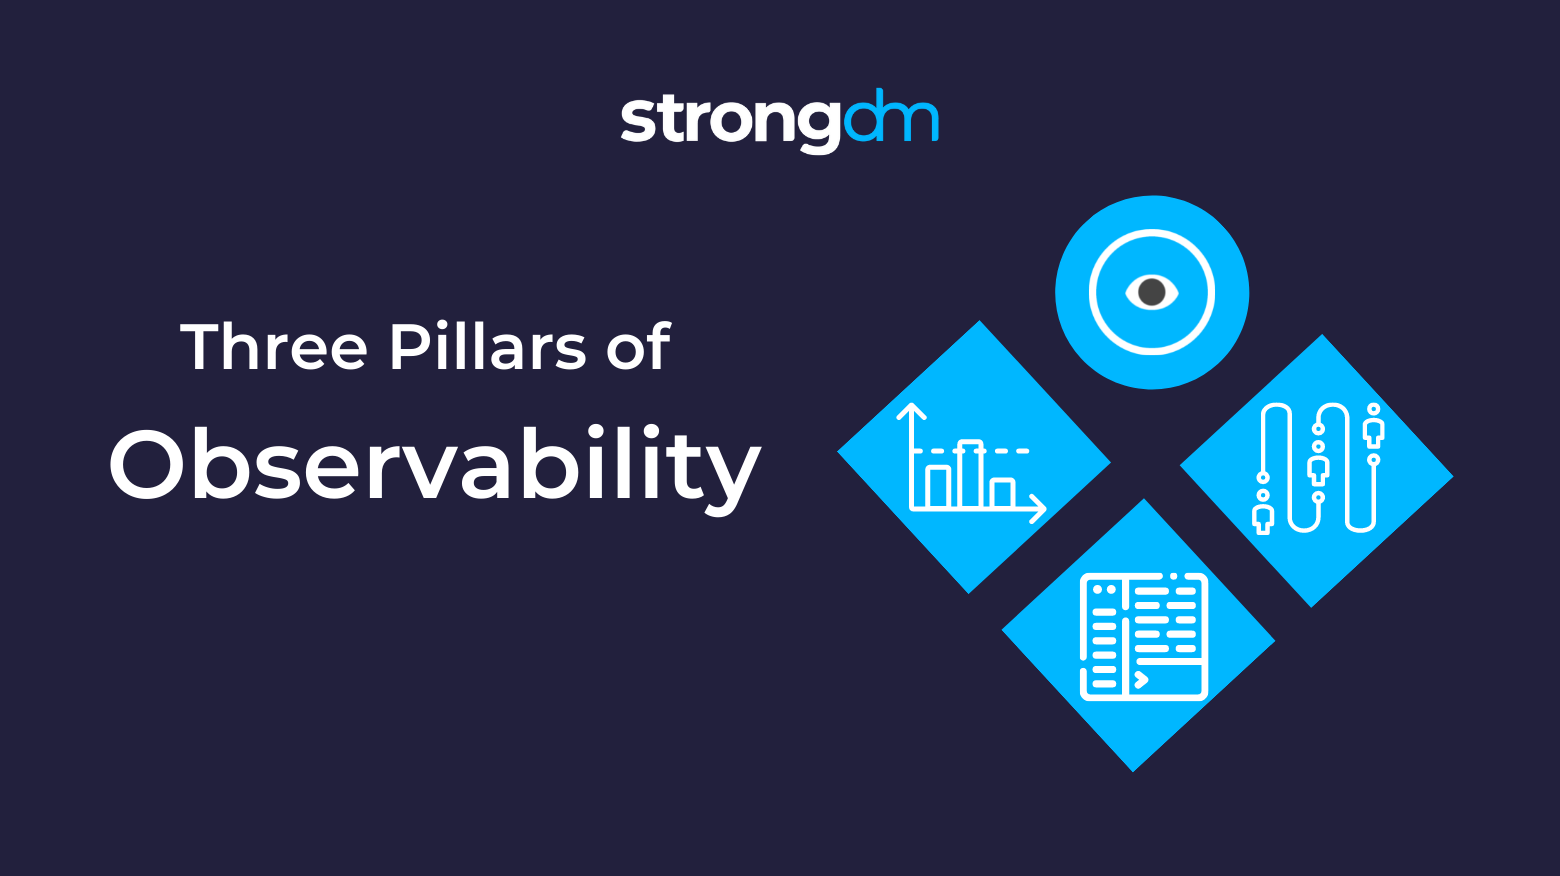 OK, but what are The Three Pillars of Observability?